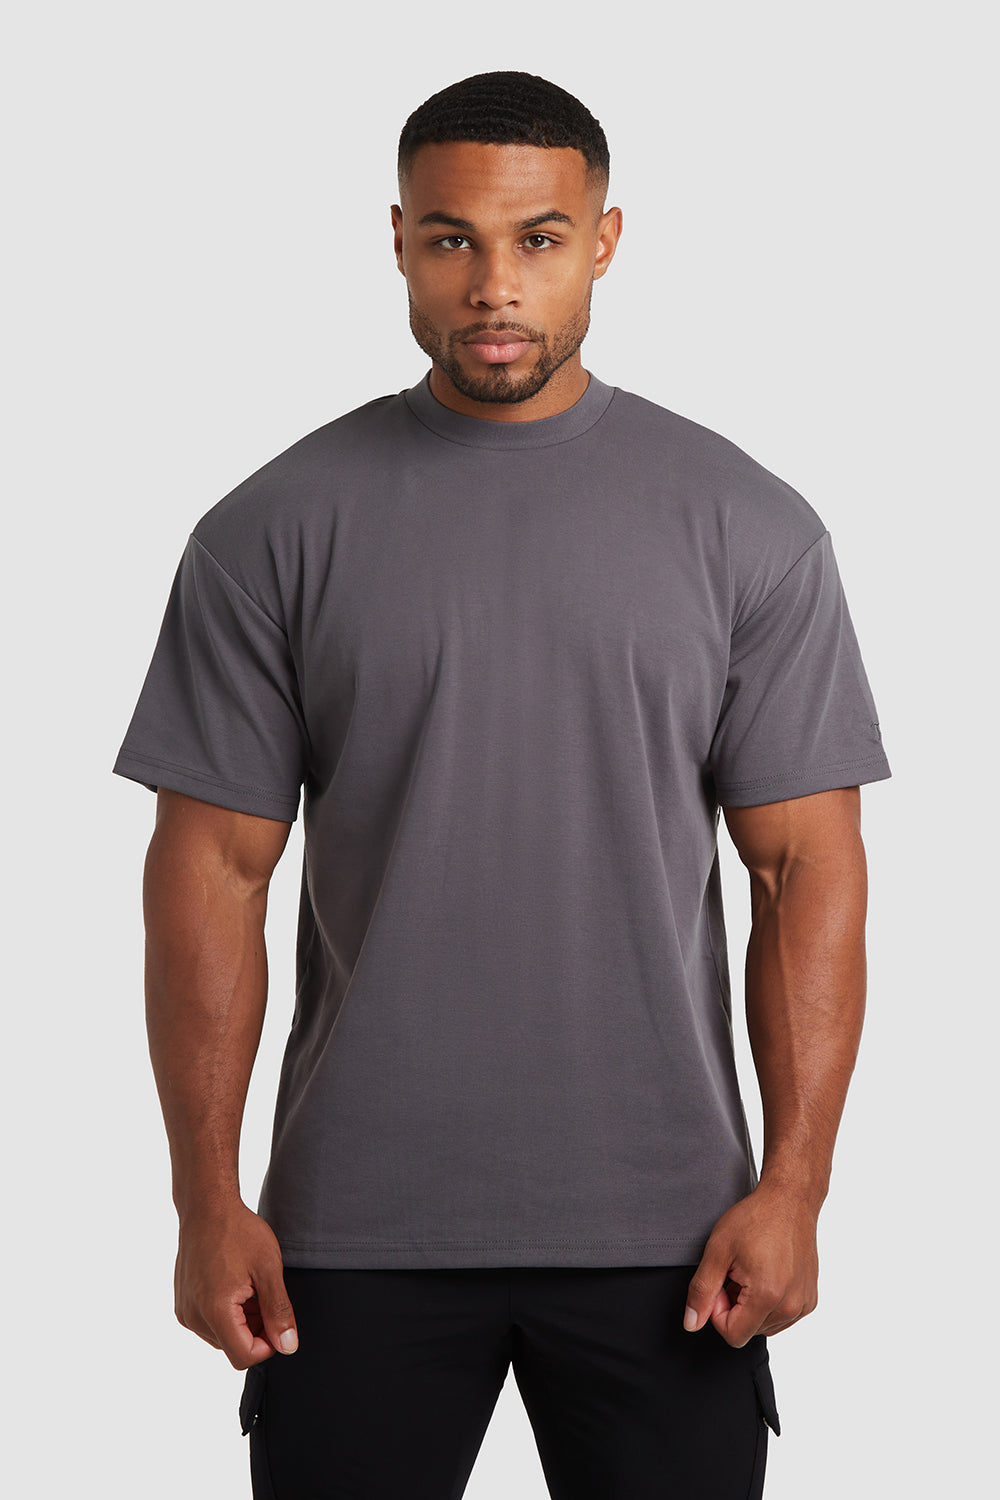 Tailored Athlete Boxy Fit T-Shirt in Lead, L